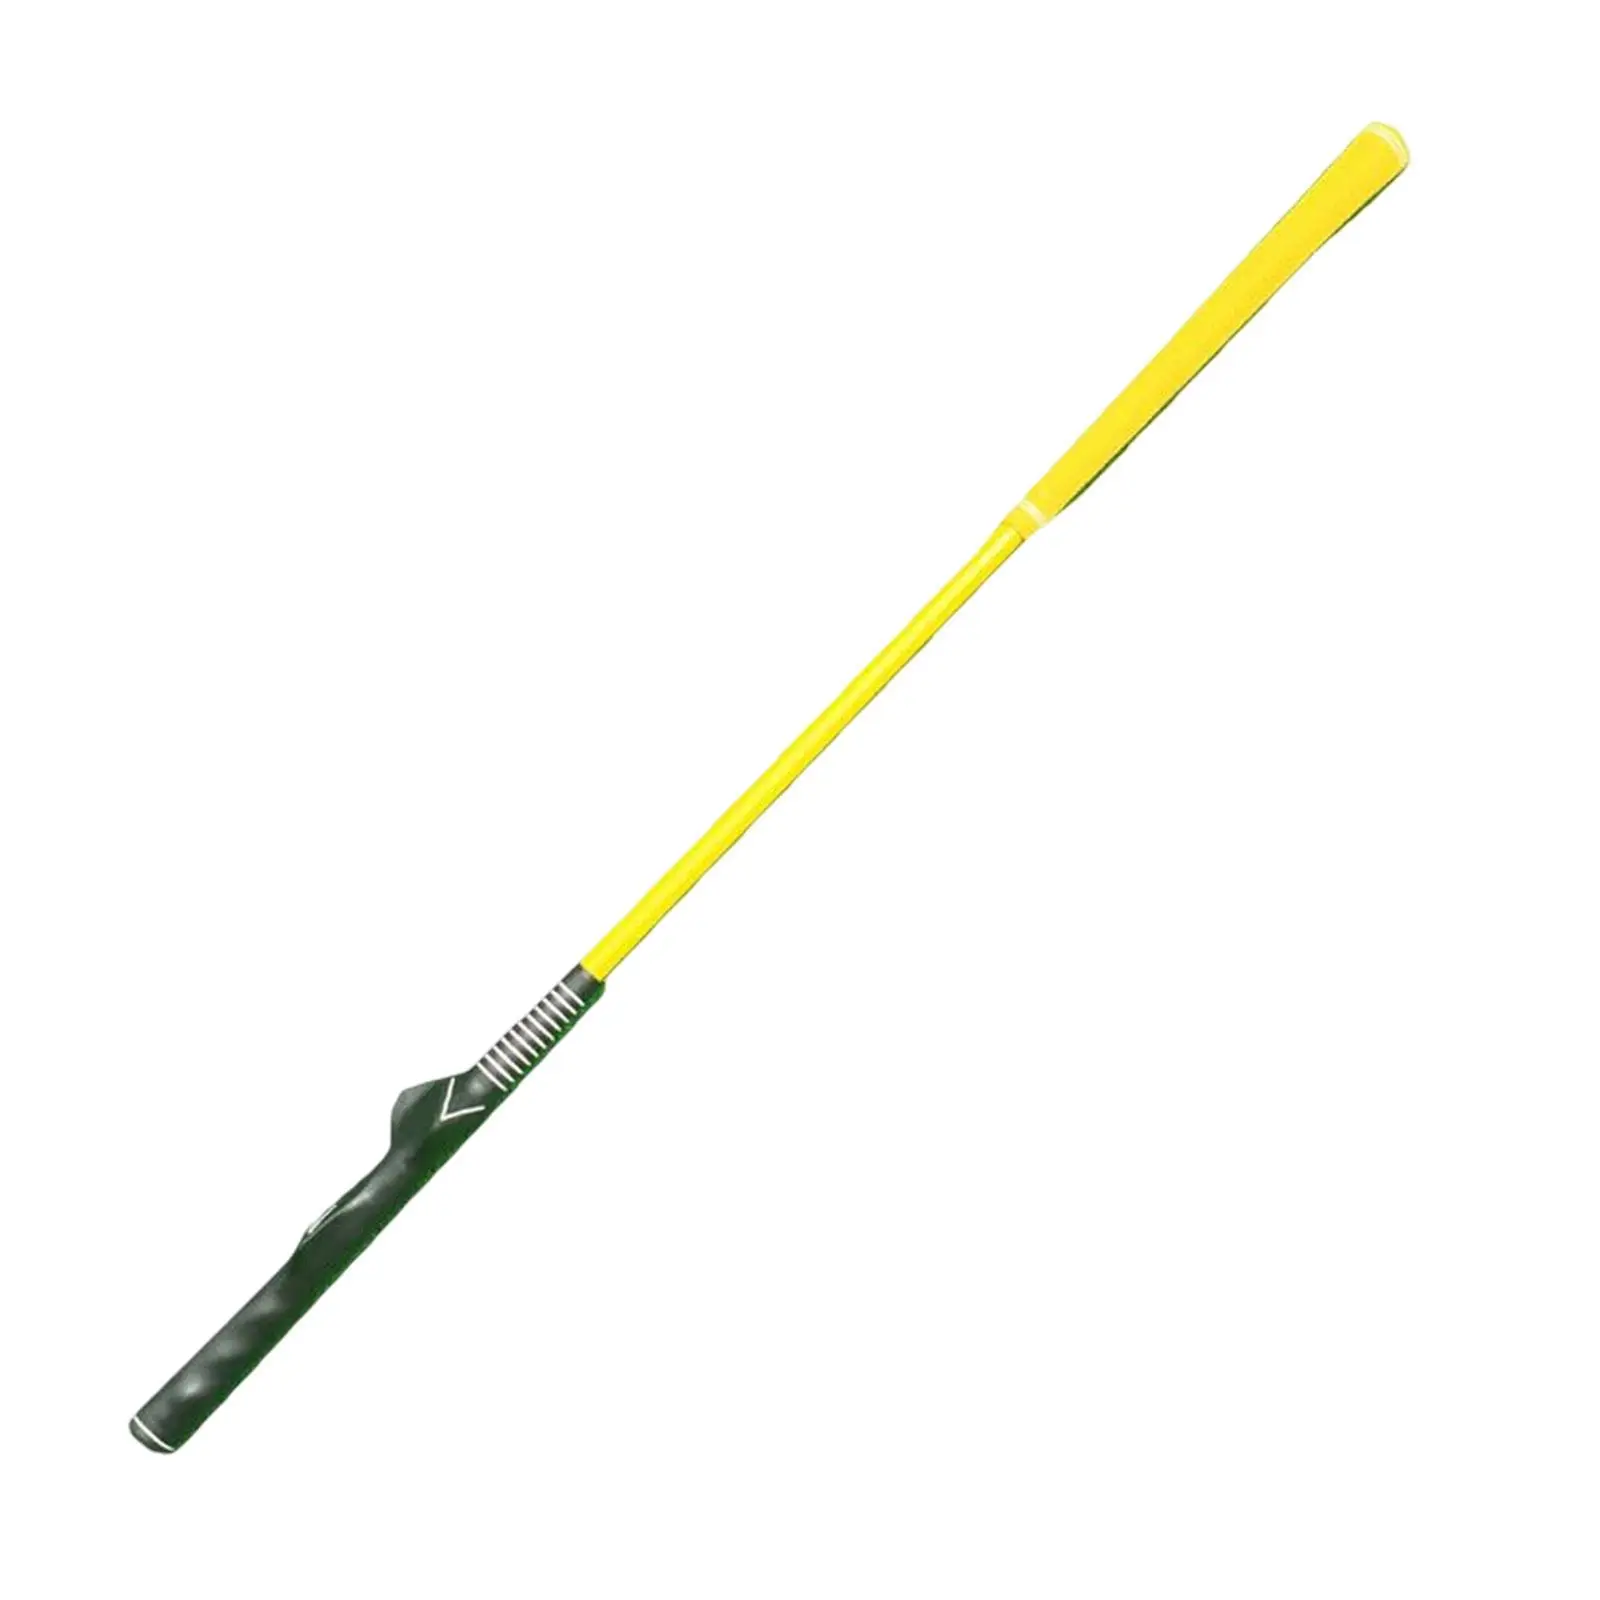 Golf Swing Trainer Aid Warm up Stick Nonslip Grip Teaching Training Stick for Practice